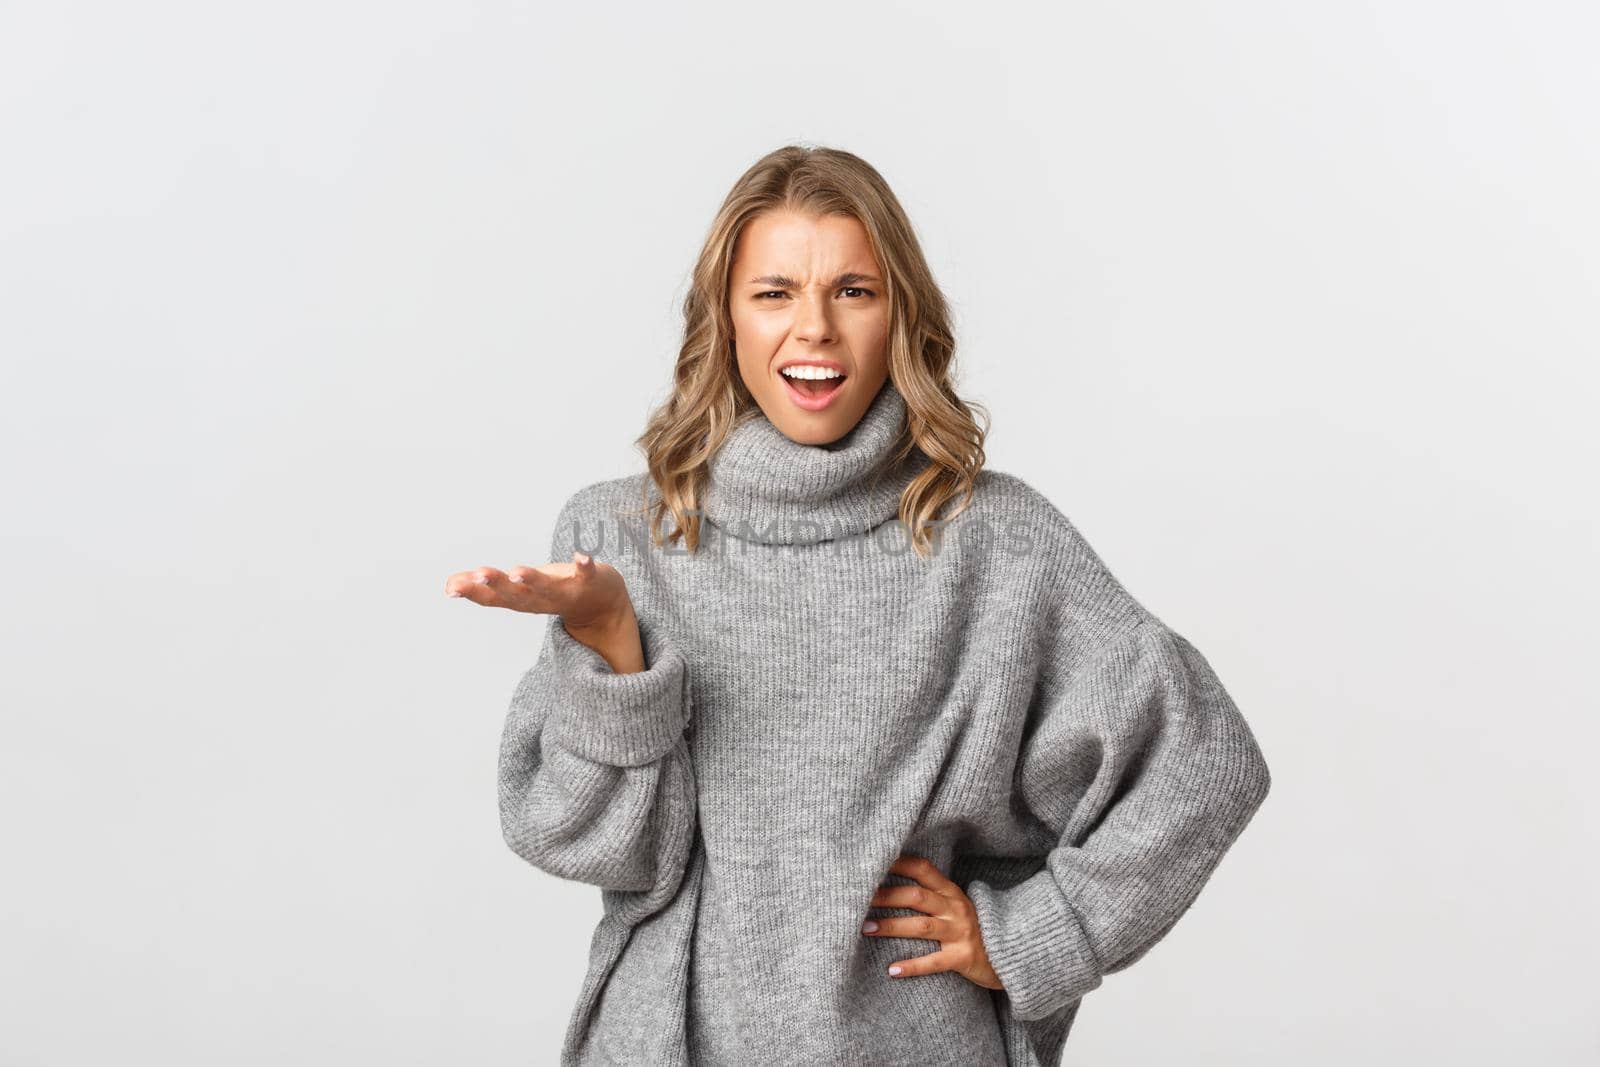 Image of frustrated and bothered blond woman in grey sweater need answers, raising hand and frowning, standing over white background.